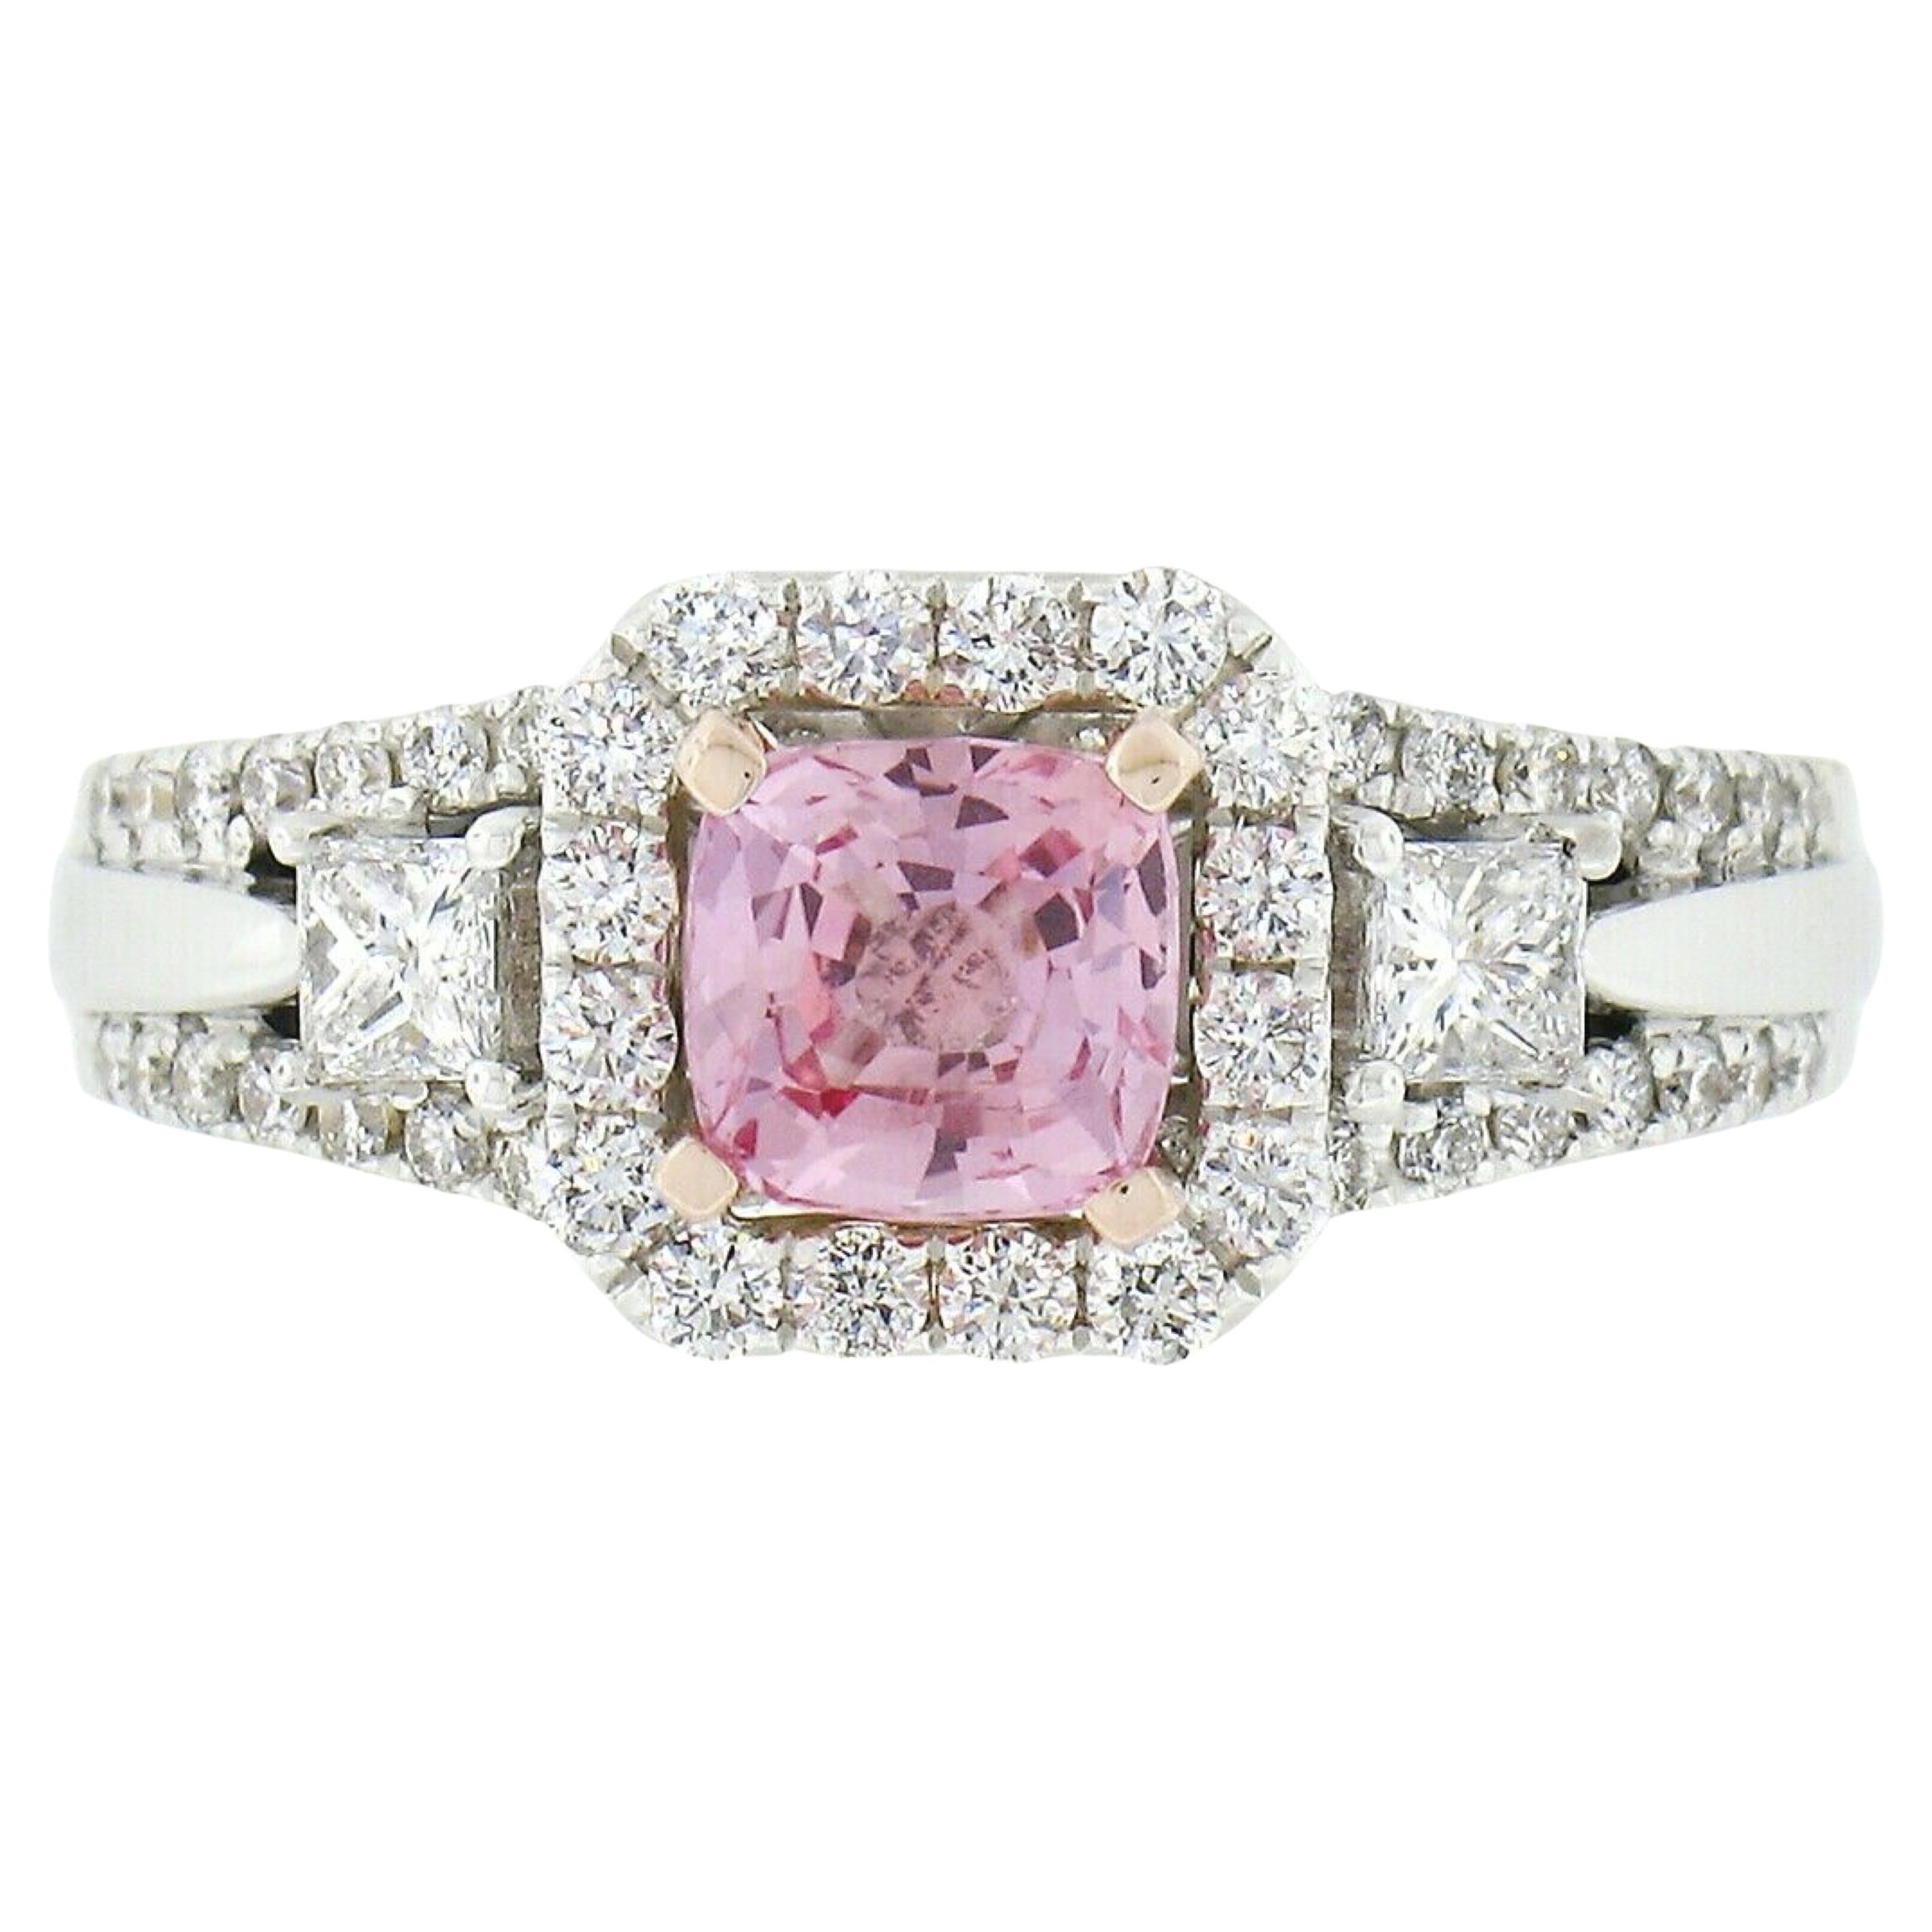 New 14k White Gold 1.55ctw No Heat Pink Cushion Sapphire Diamond Engagement Ring For Sale